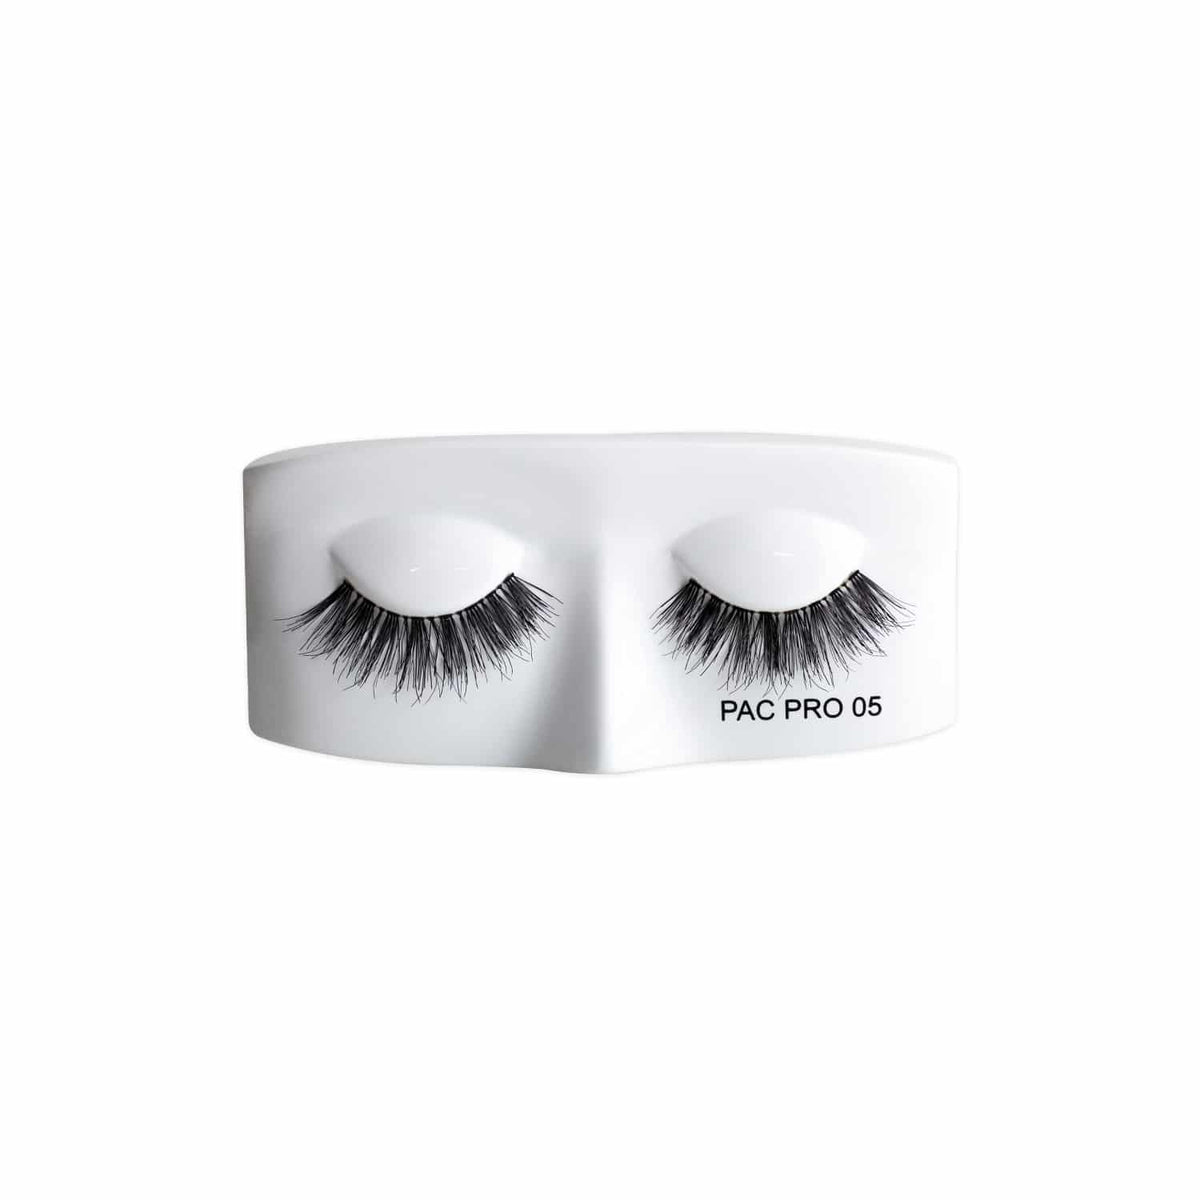 PAC PRO Tapered Lash (PRO05) PAC